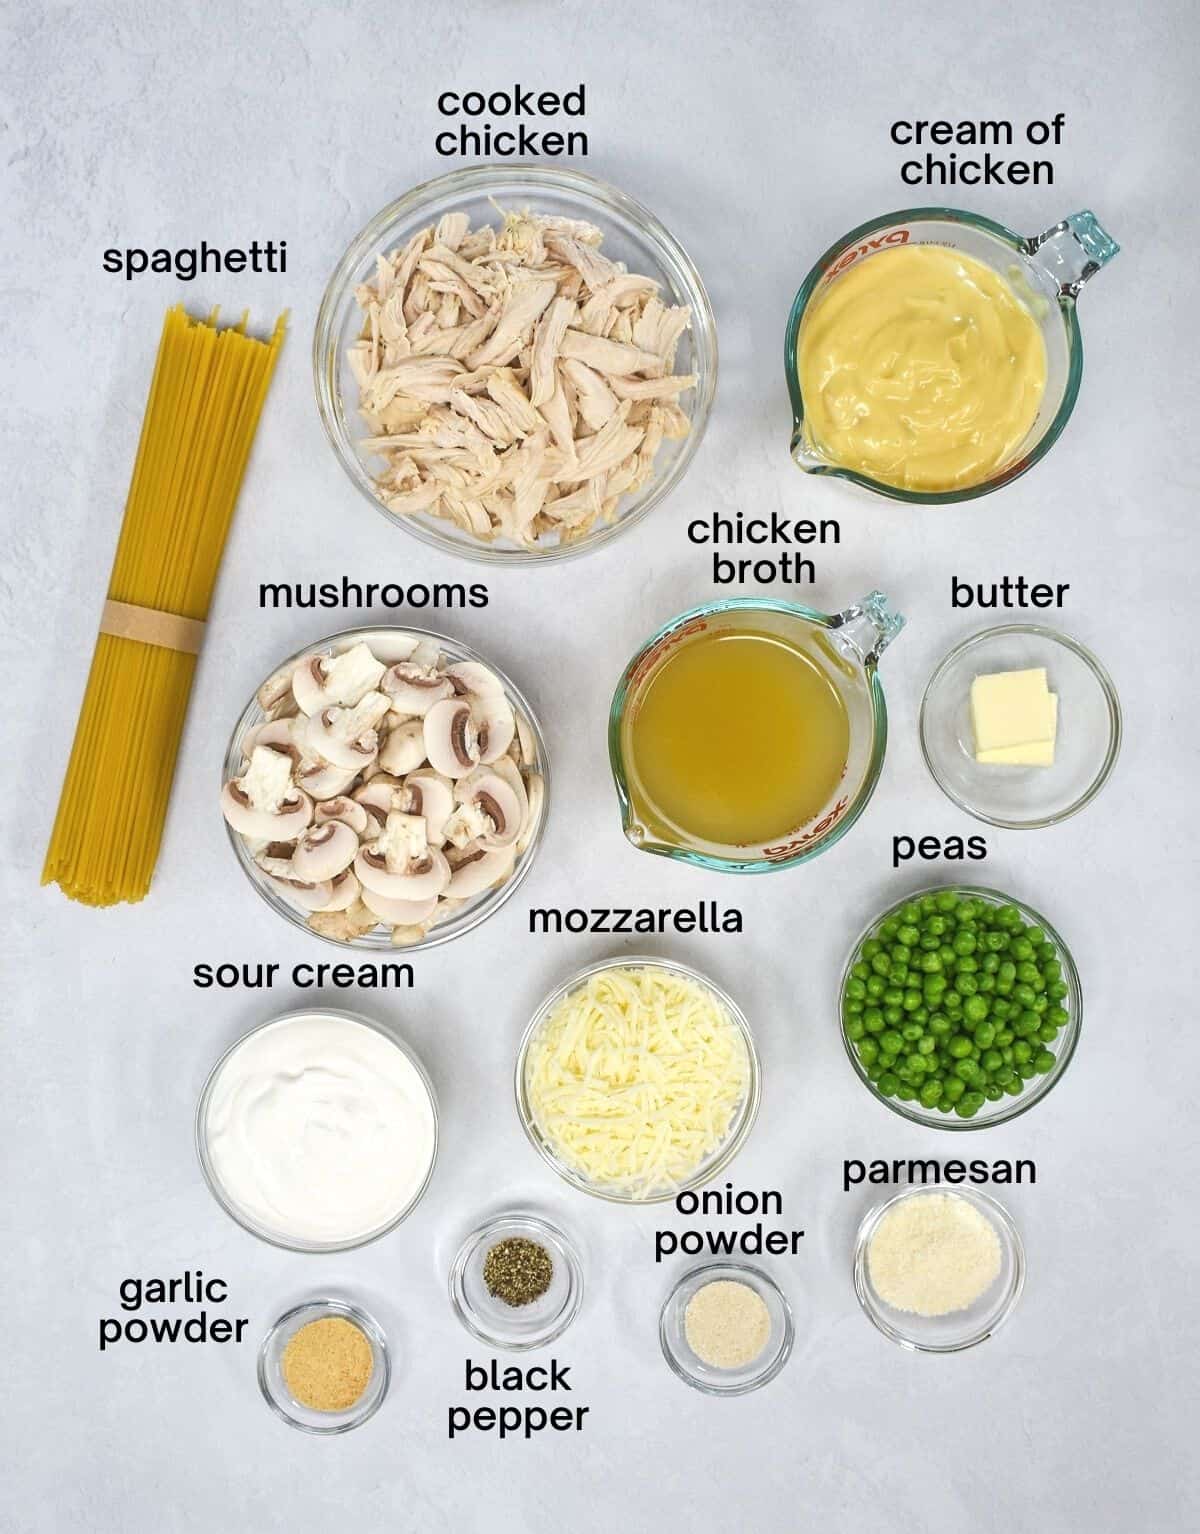 The prepped ingredients for the tetrazzini arranged in glass bowls on a white table. Each ingredient has the name in small black letters.